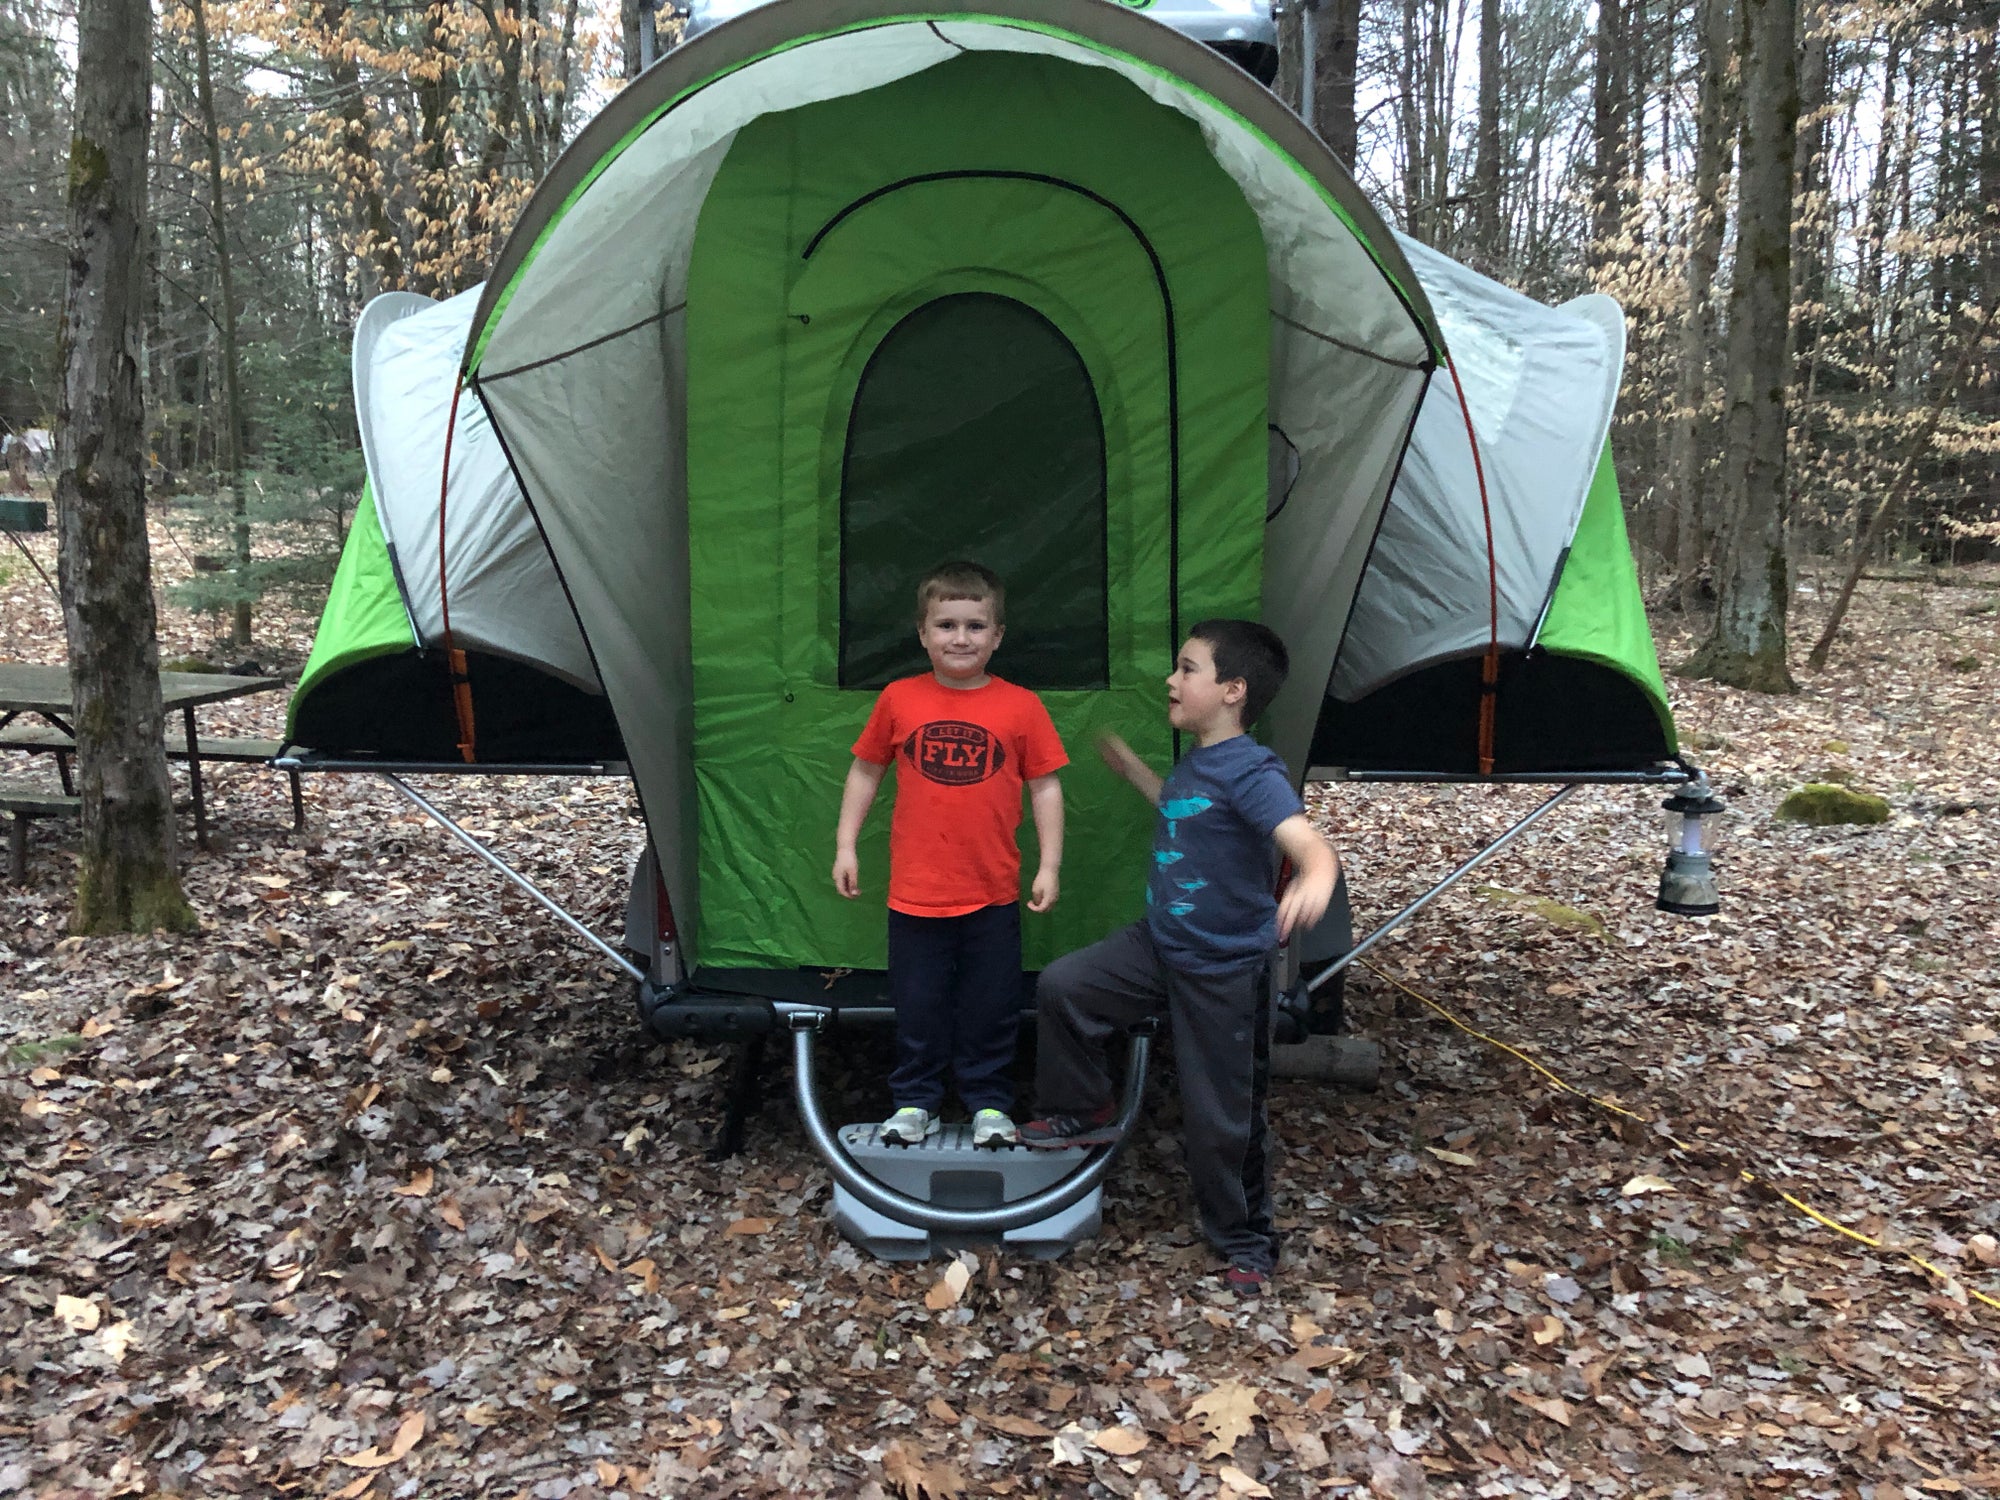 2 Boys stand in front of green unconventional tent structure in the woods.